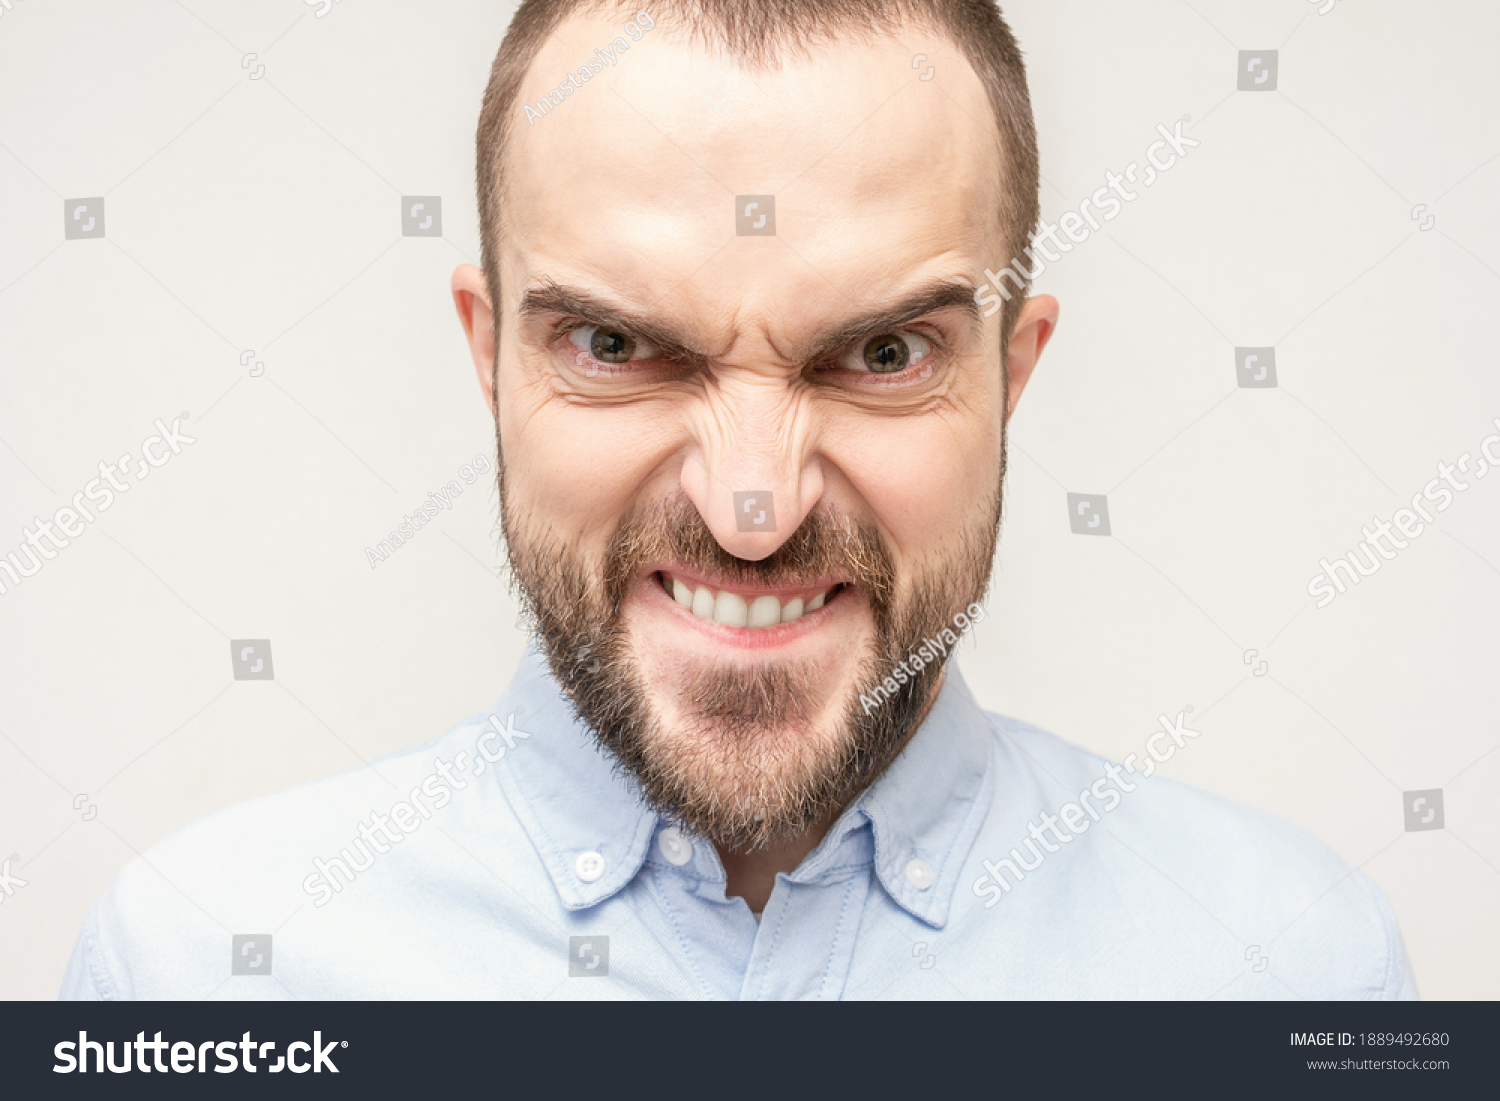 Gloating bearded man, portrait of an angry man with a grimace on his face, white background, close-up #1889492680